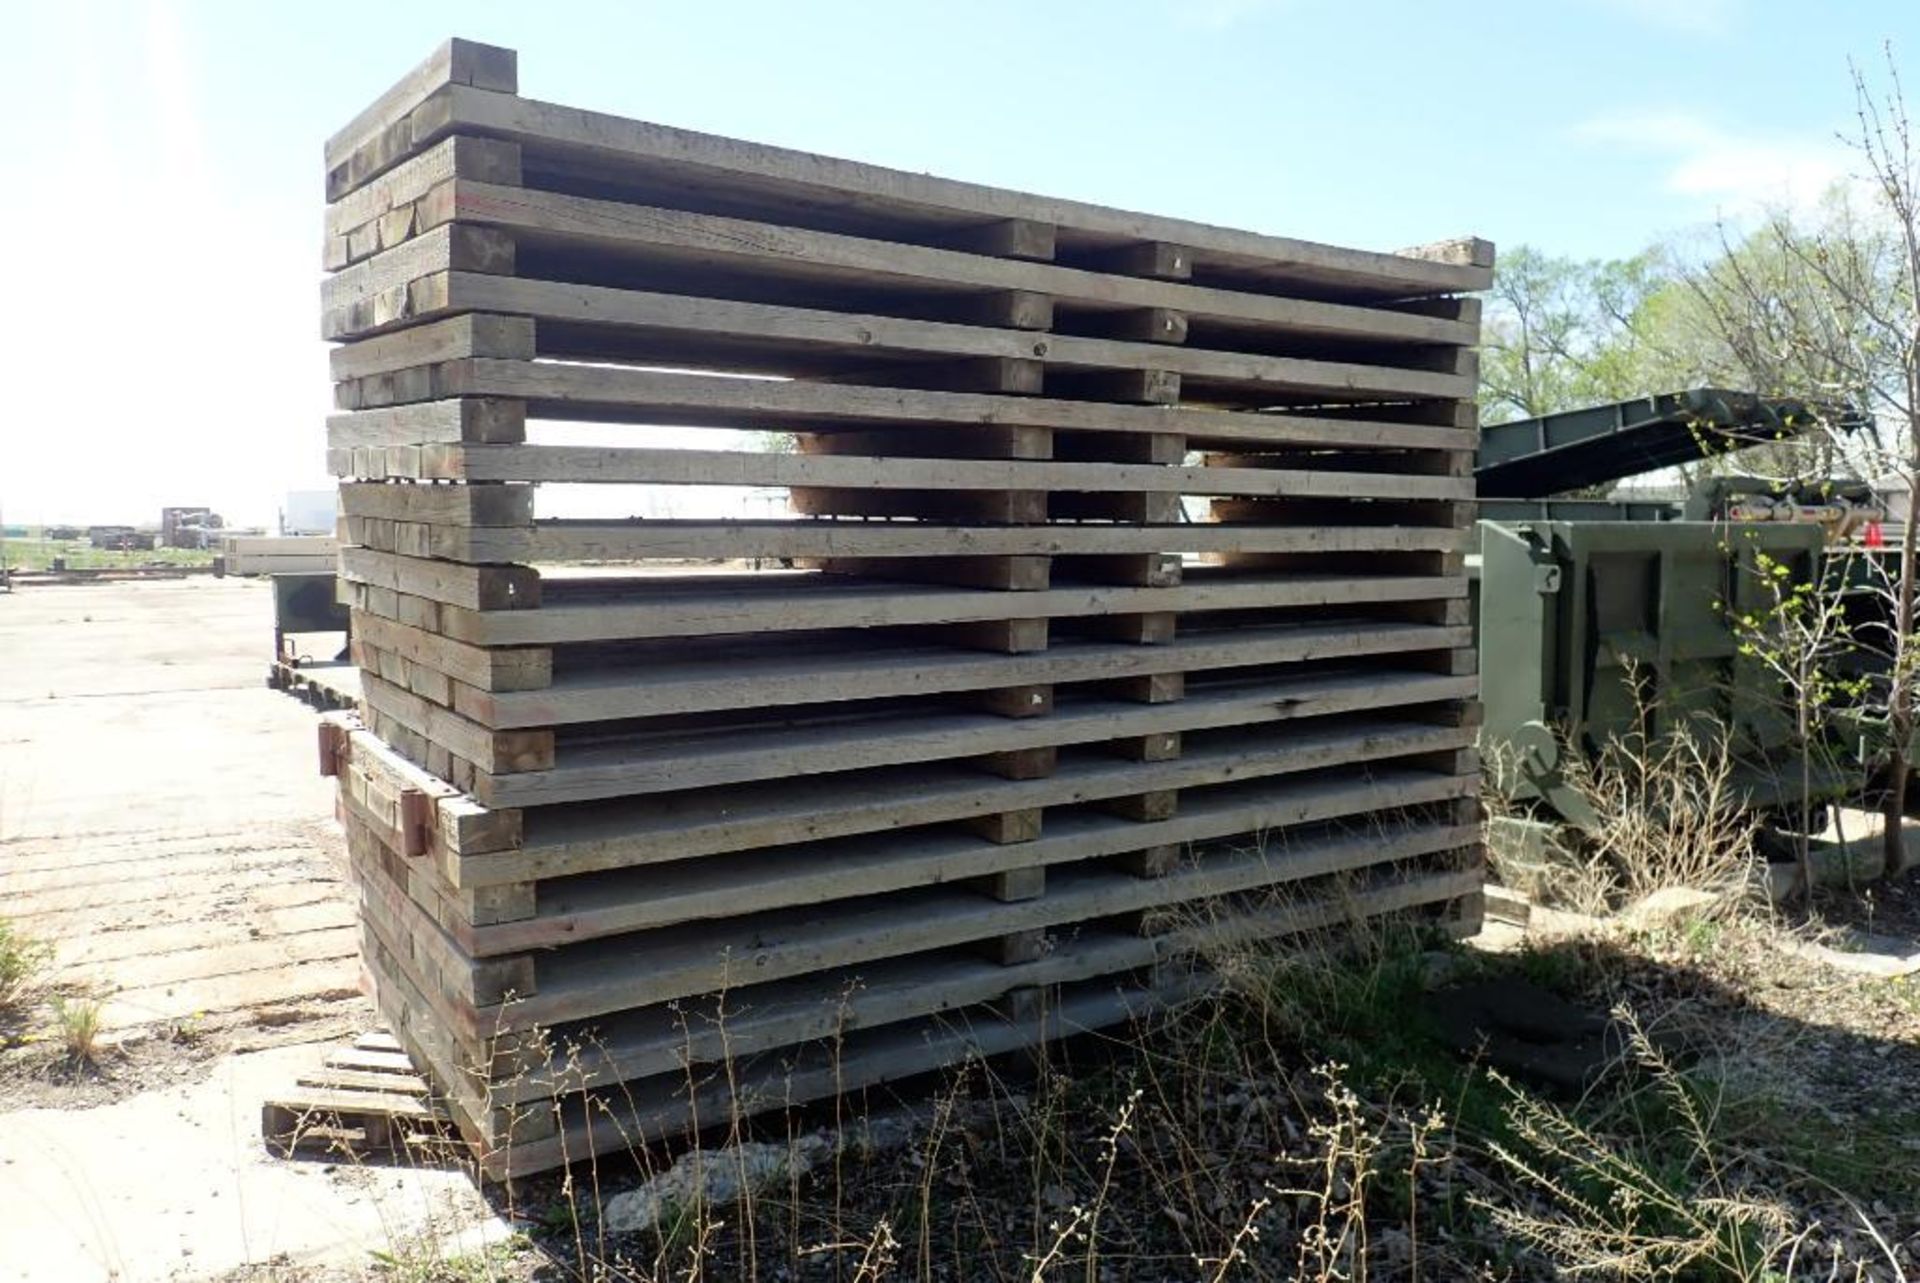 Lot of (9) 12'3"x50" Wooden Deck Sections and (5) 12'3"x60" Wooden Deck Sections.